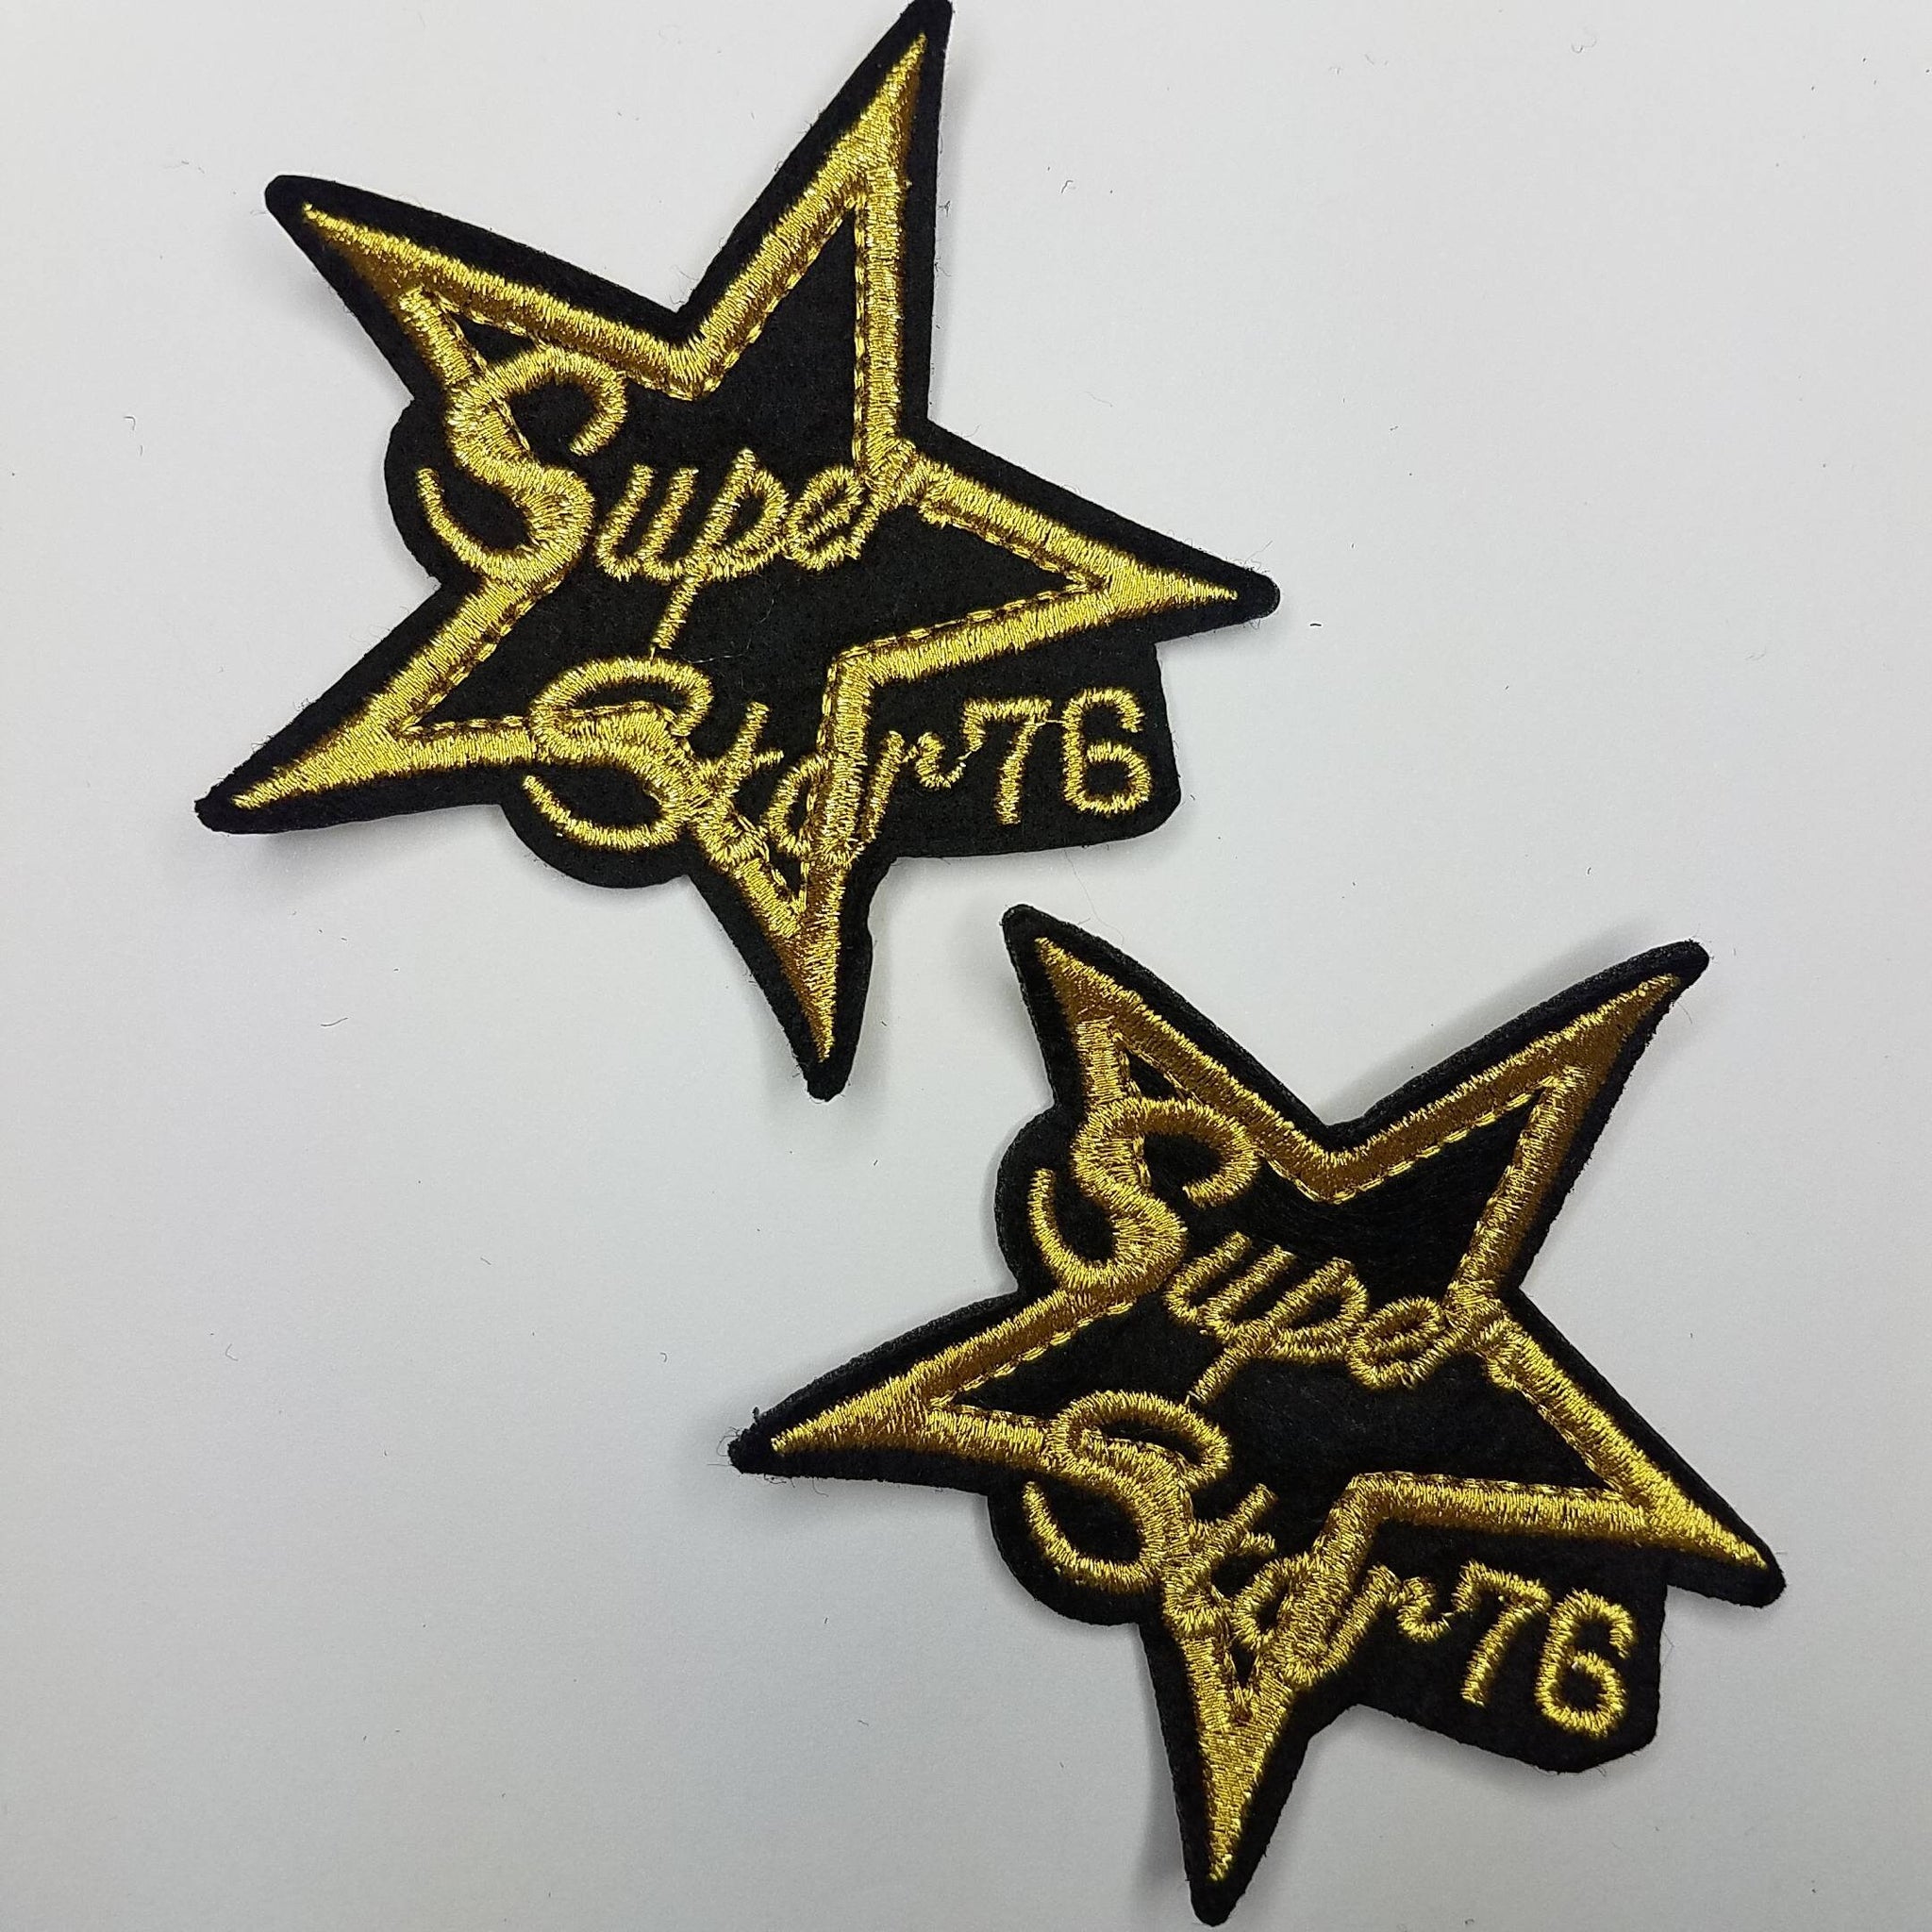 2-pc Star Patch Set, "Super Star 76" Metallic Gold and Black Stars, Small Emblems, DIY, Embroidered Applique Iron On Patches, Size 2"